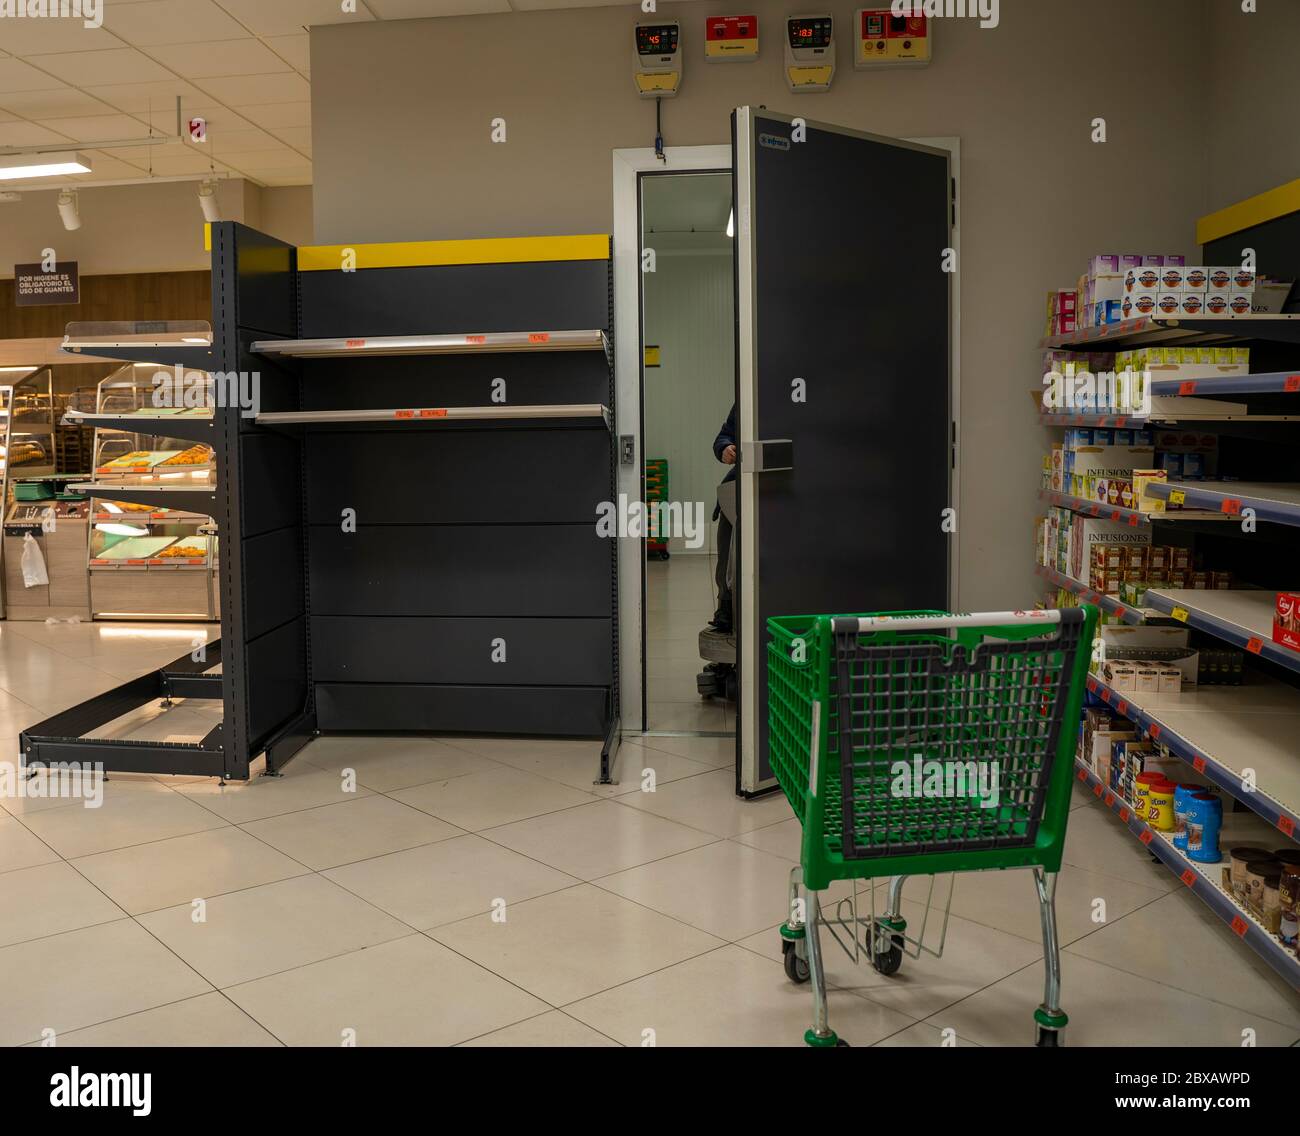 Empty shelves due to panic buying caused by coronavirus crisis. Shortage of food and basic supplies at the supermarket. Malaga, Spain - March 12, 2020 Stock Photo